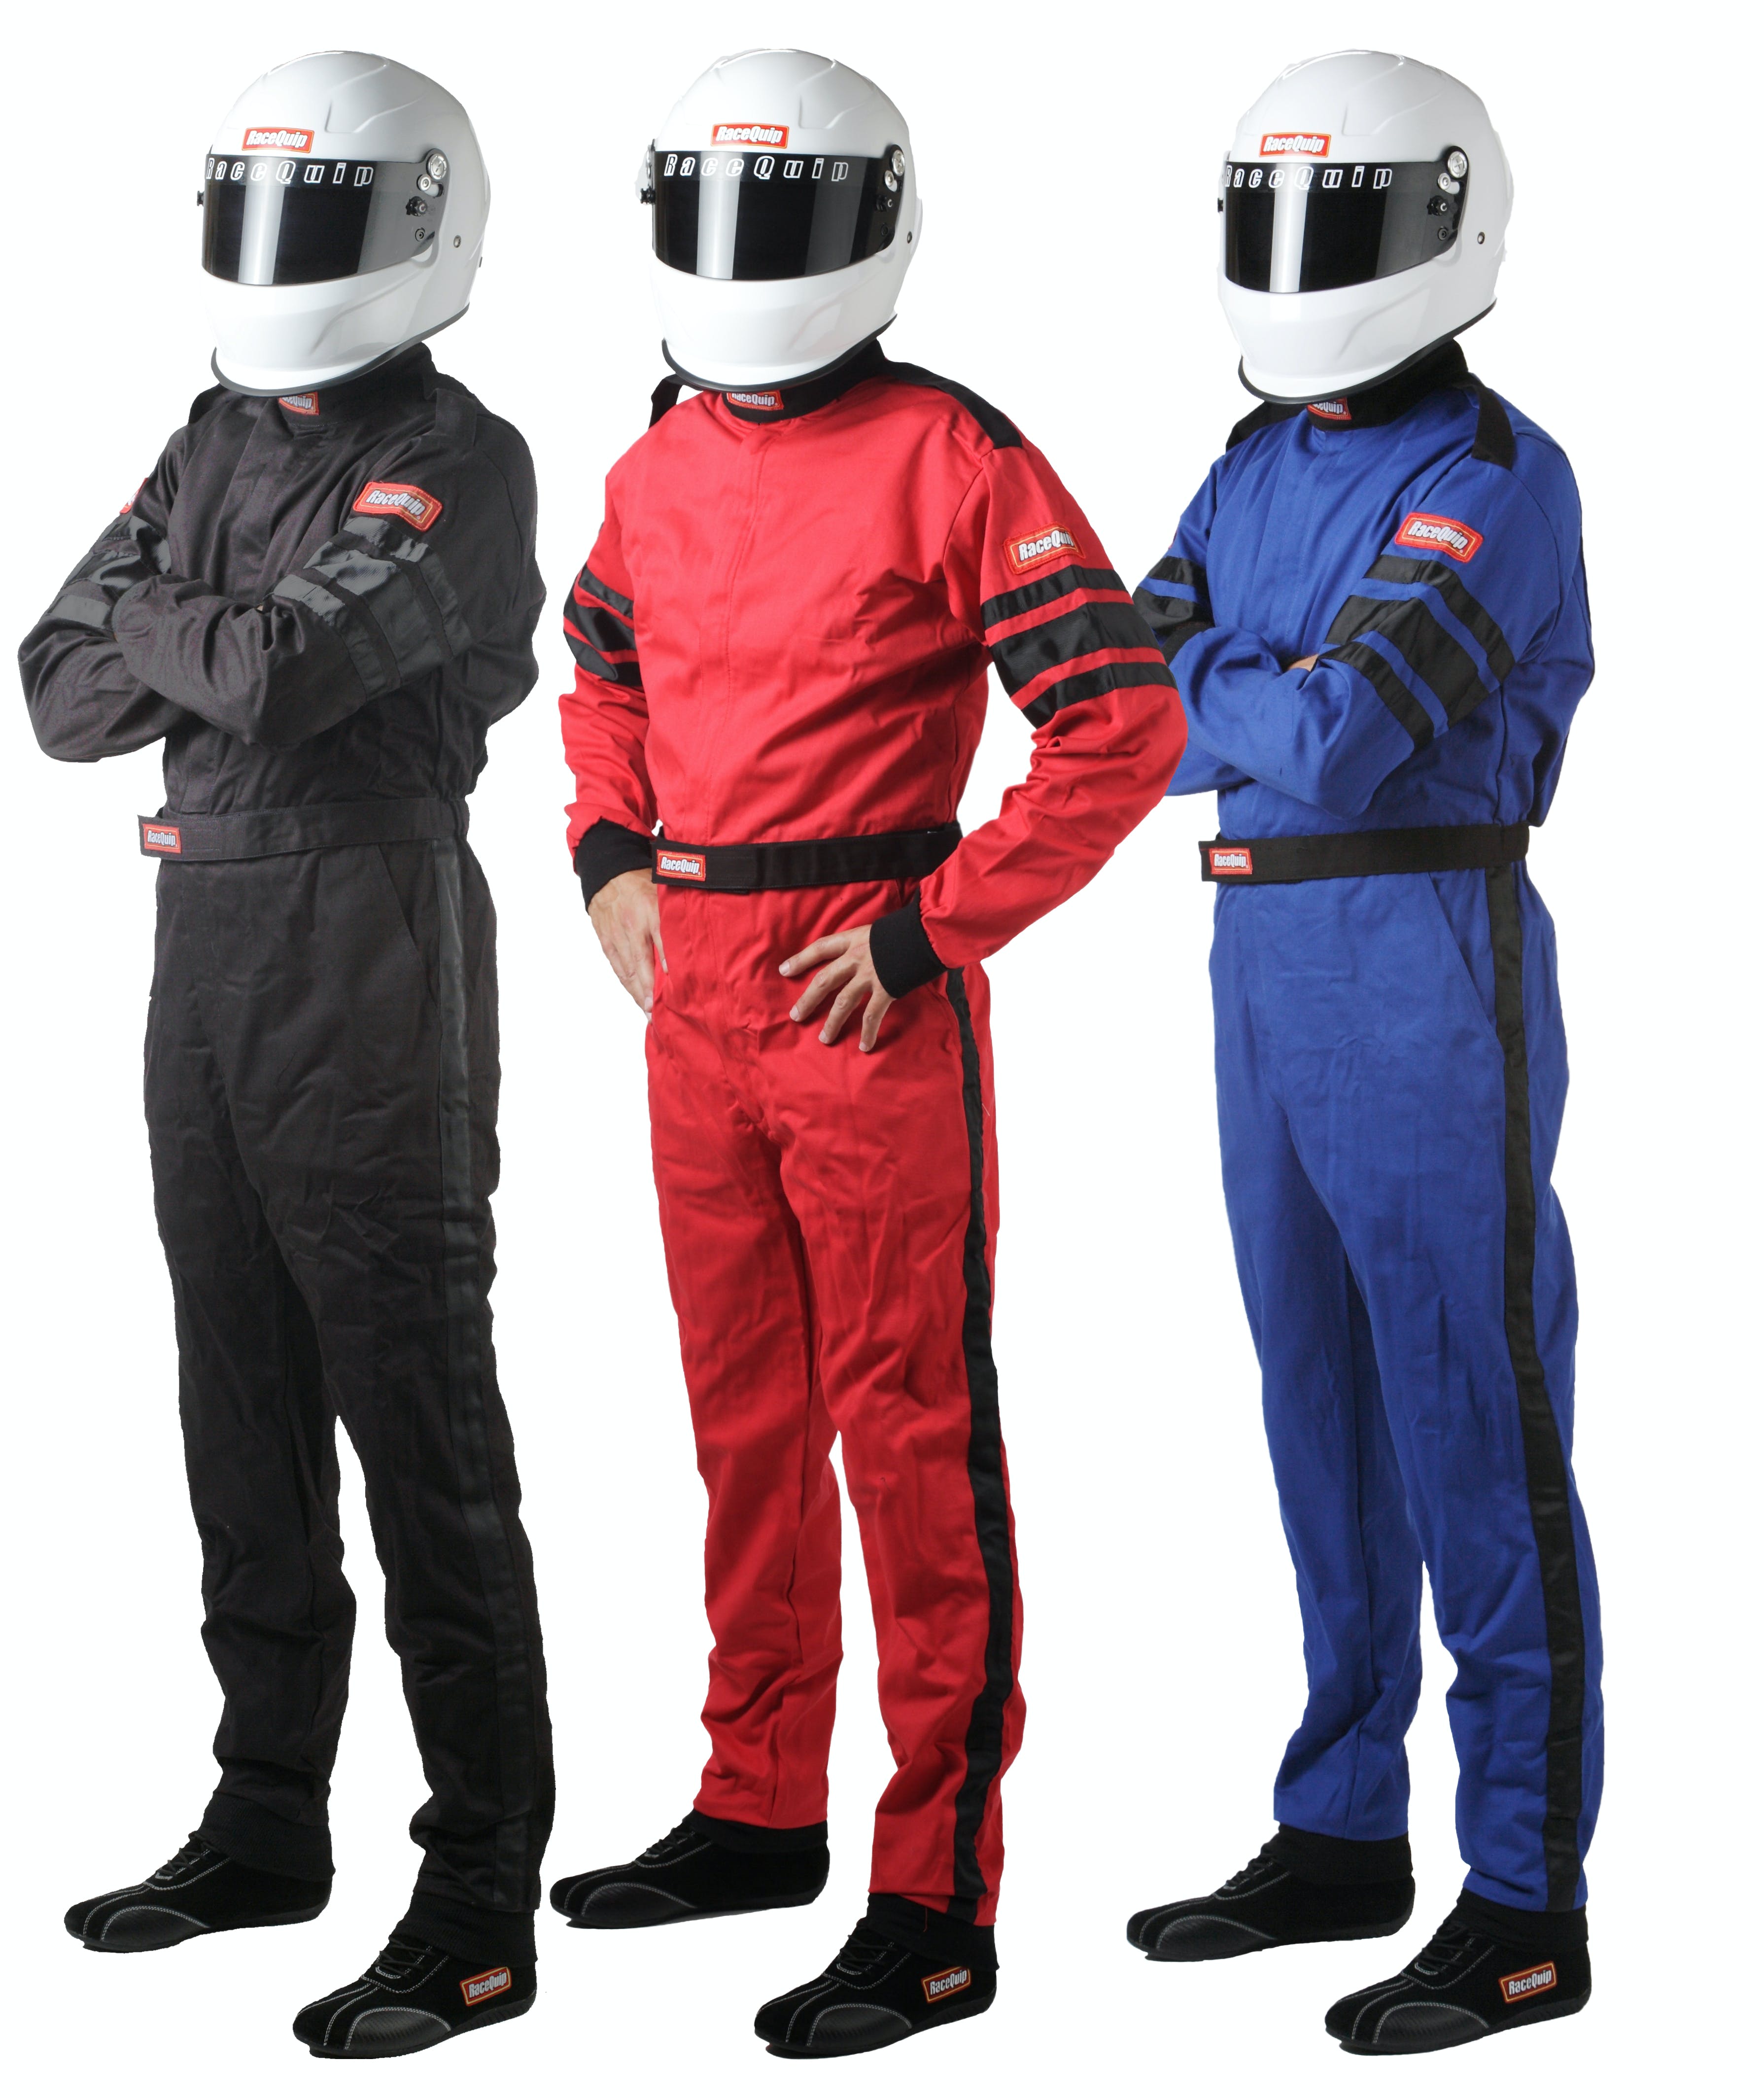 RaceQuip 110002 SFI-1 Pyrovatex One-Piece Single-Layer Racing Fire Suit (Black, Small)